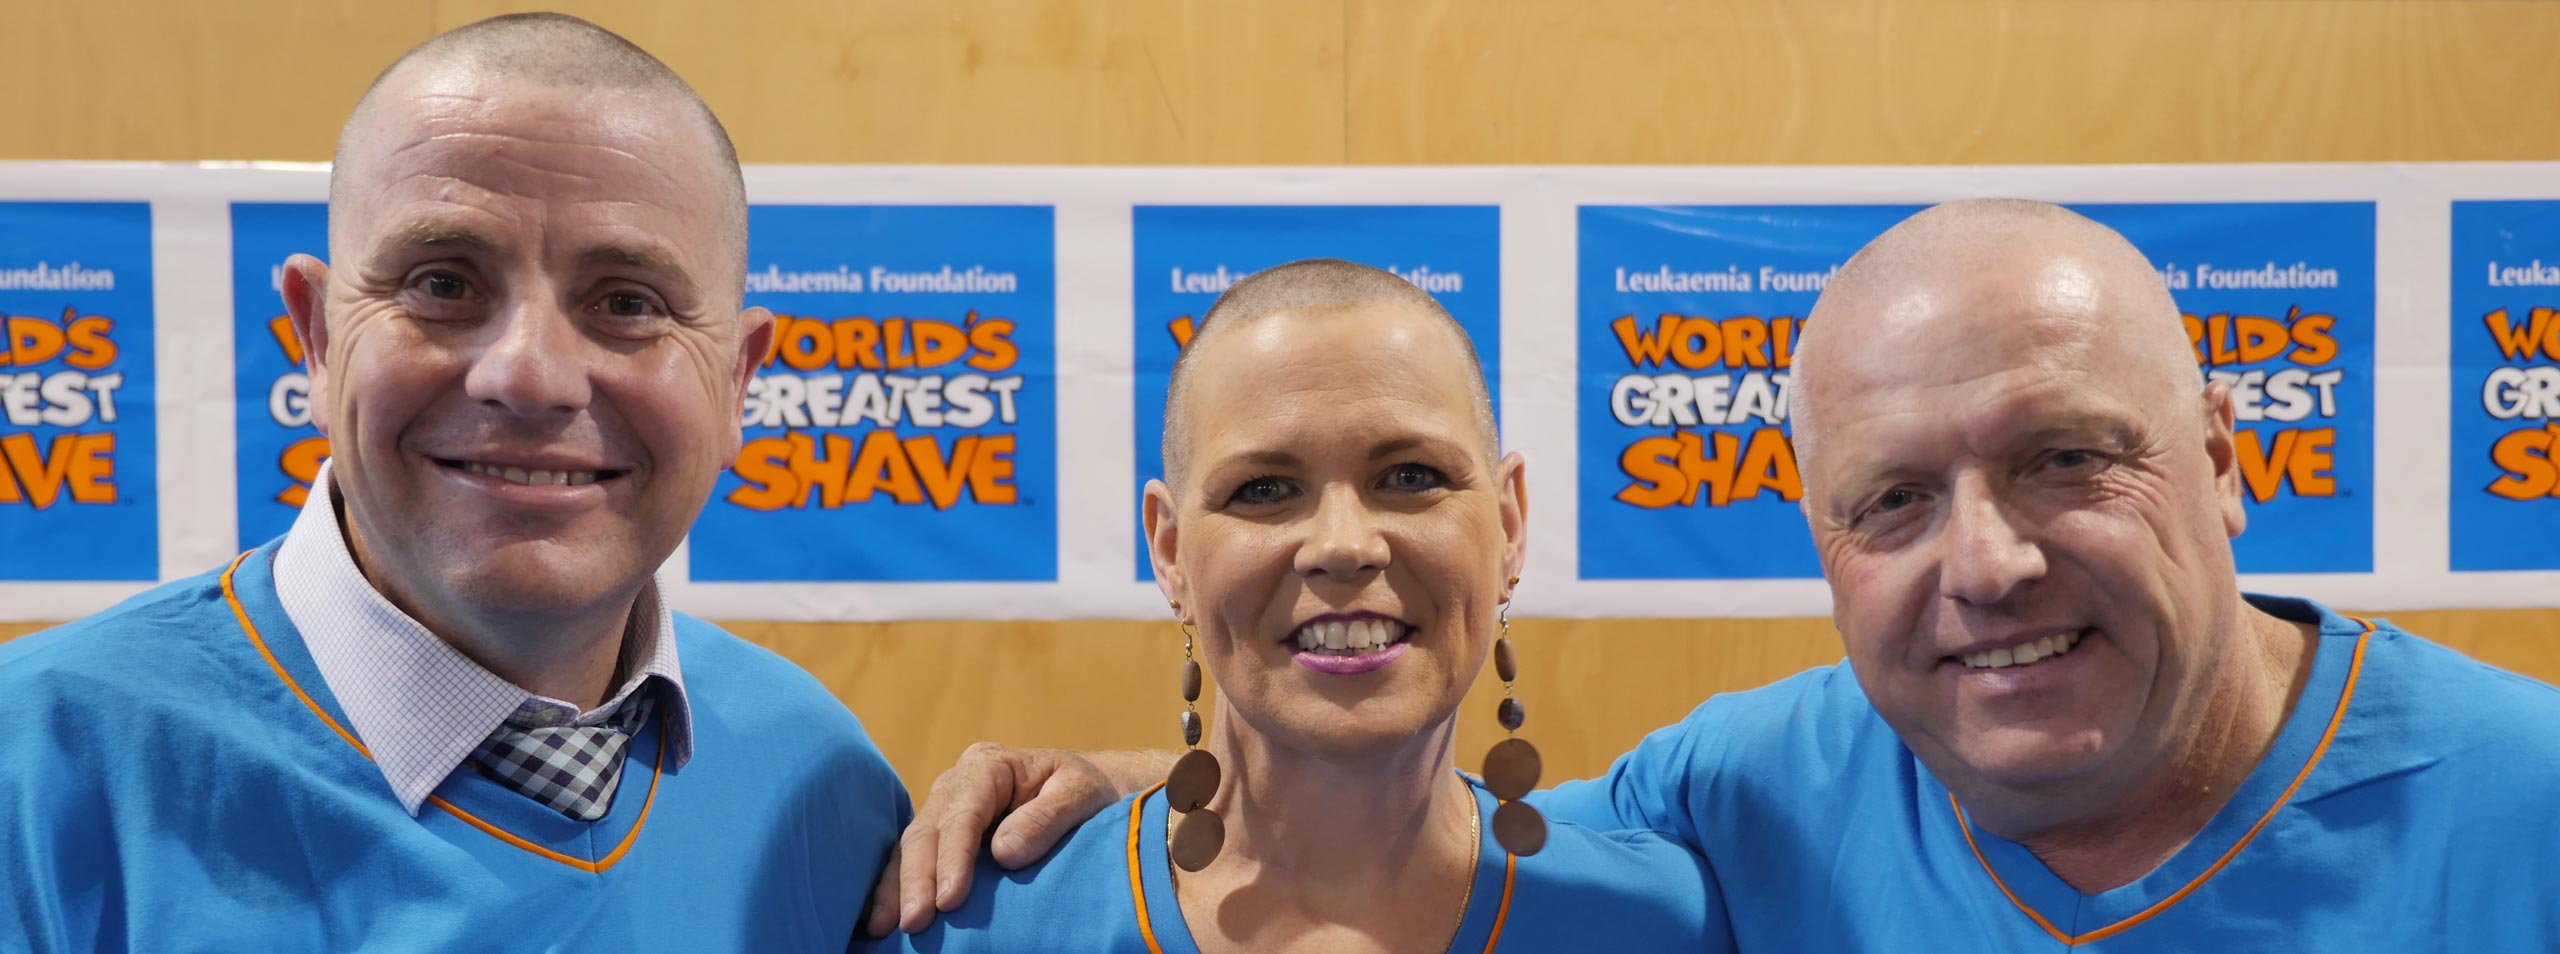 Greatest-Shave_banner